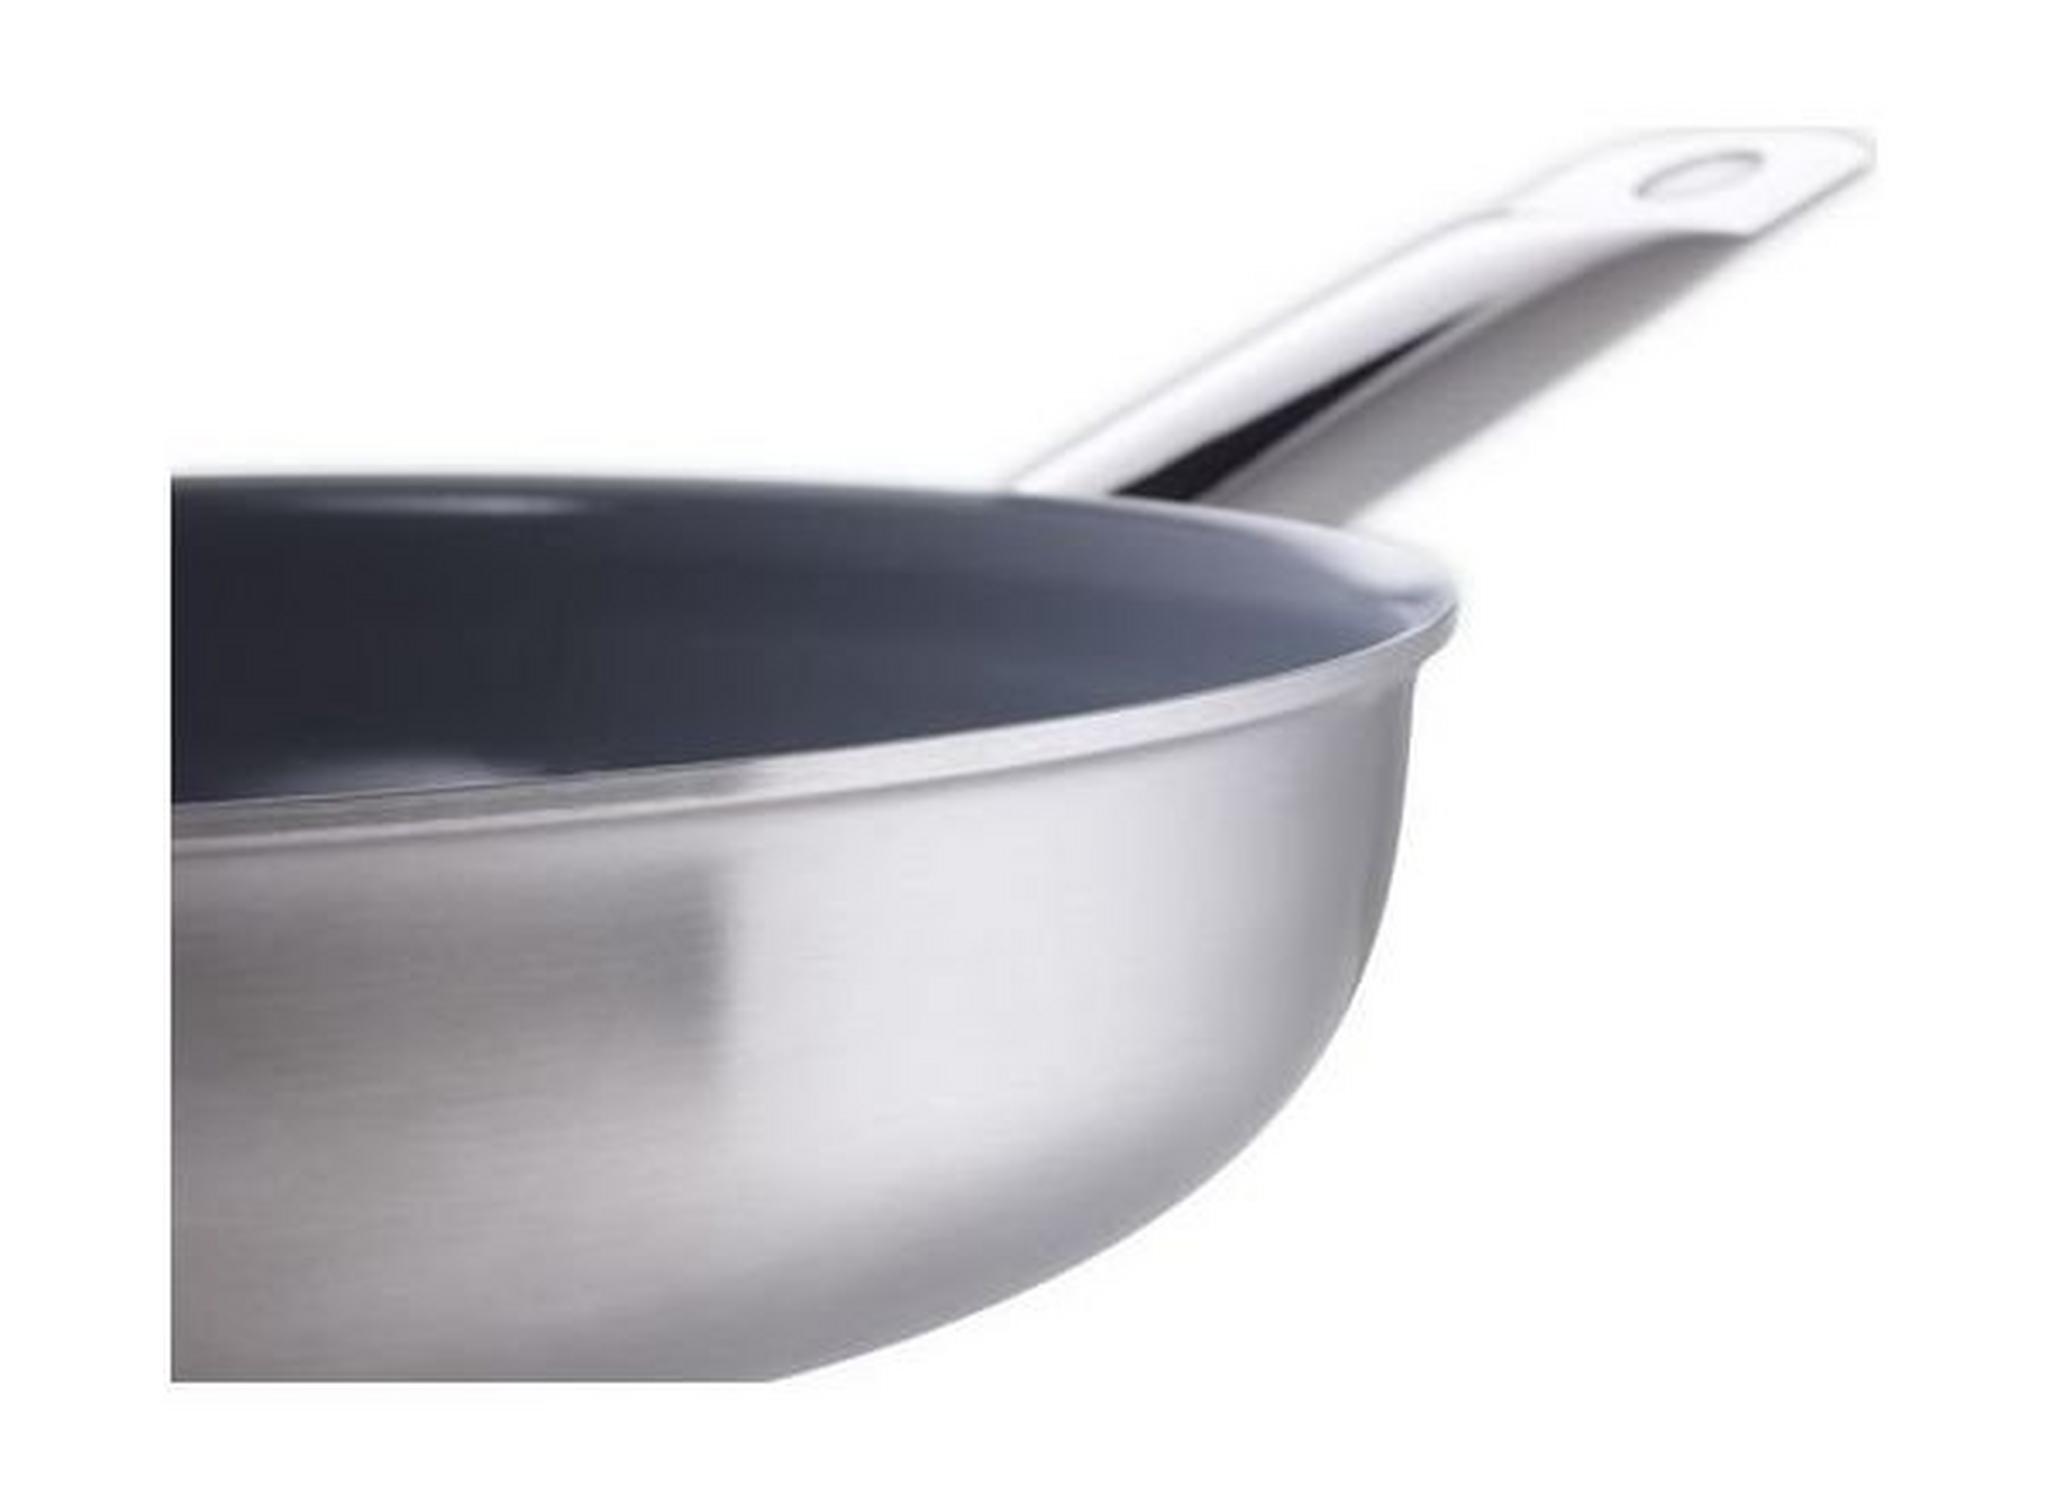 Zwilling 20CM Twin Choice Frying Pan - Stainless Steel